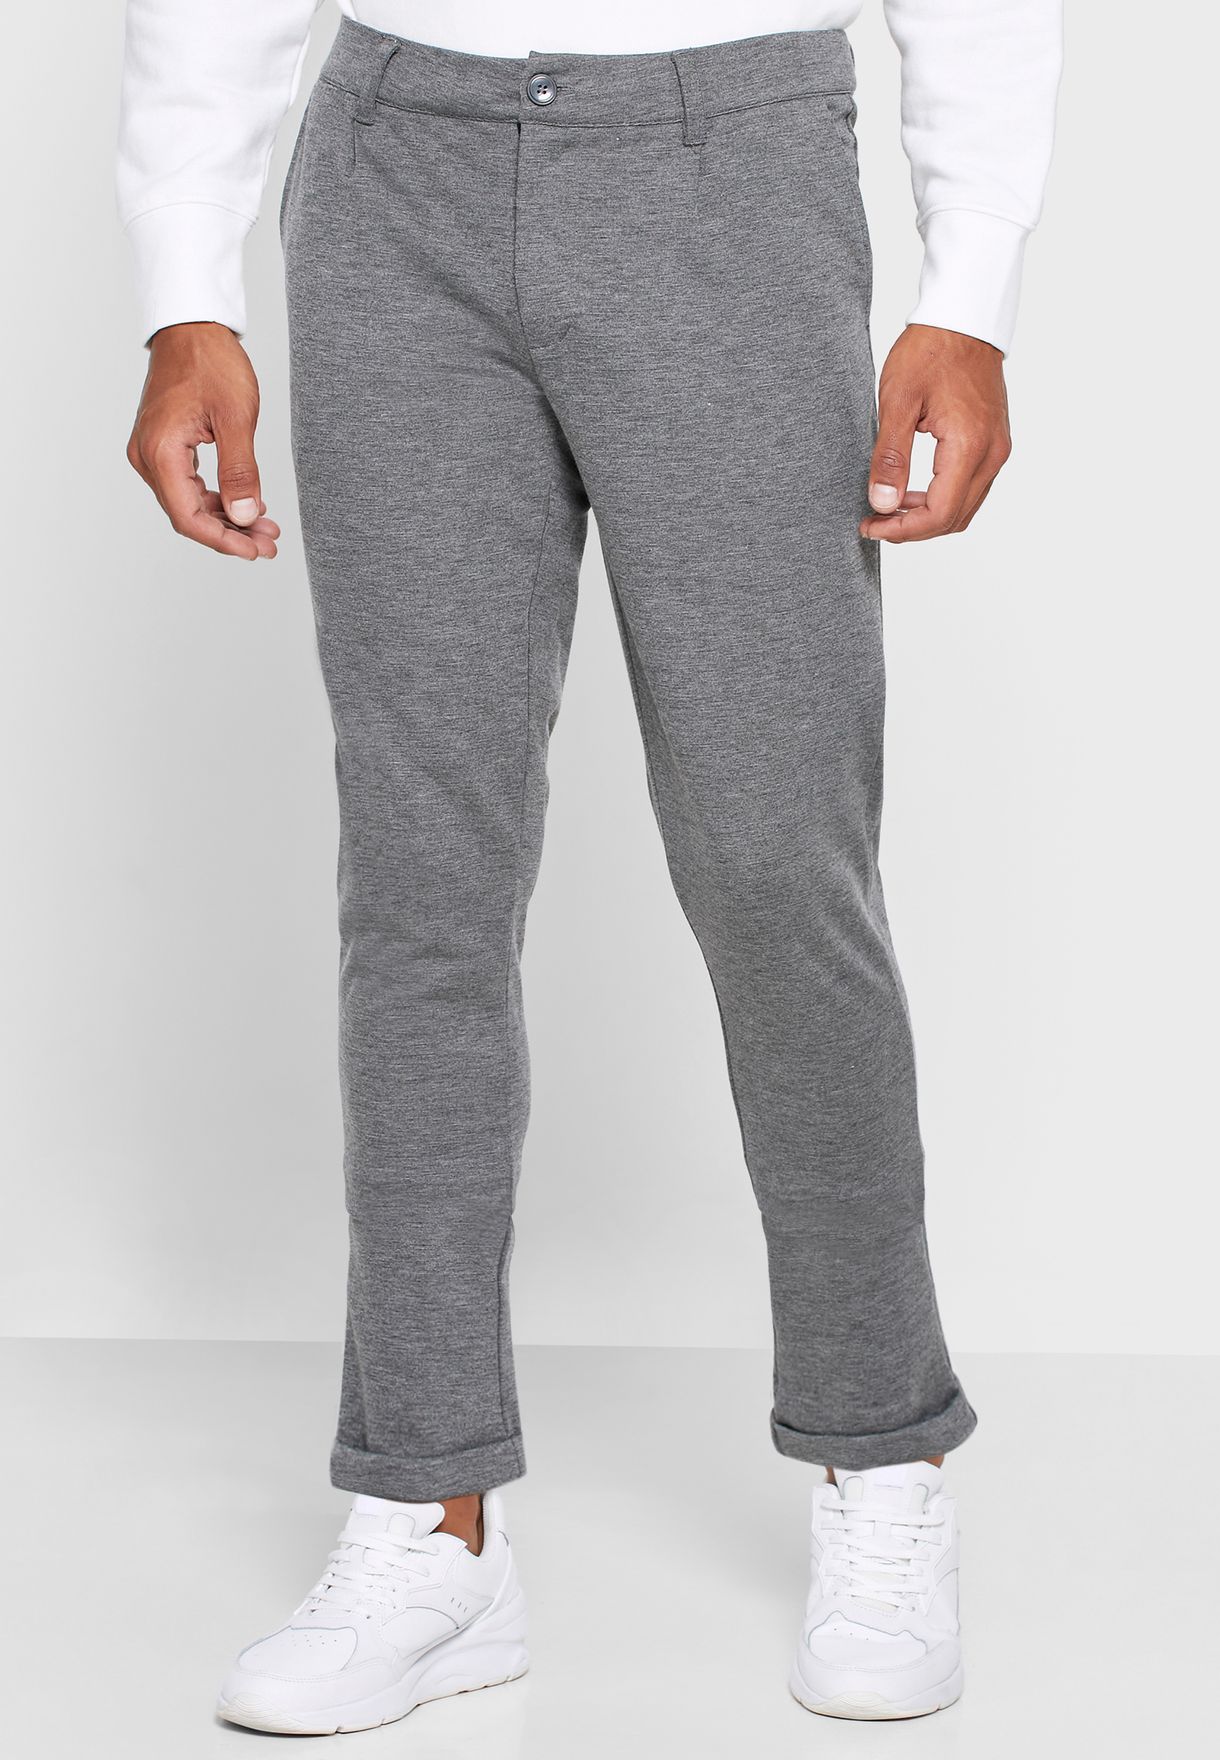 slim tapered trousers mens